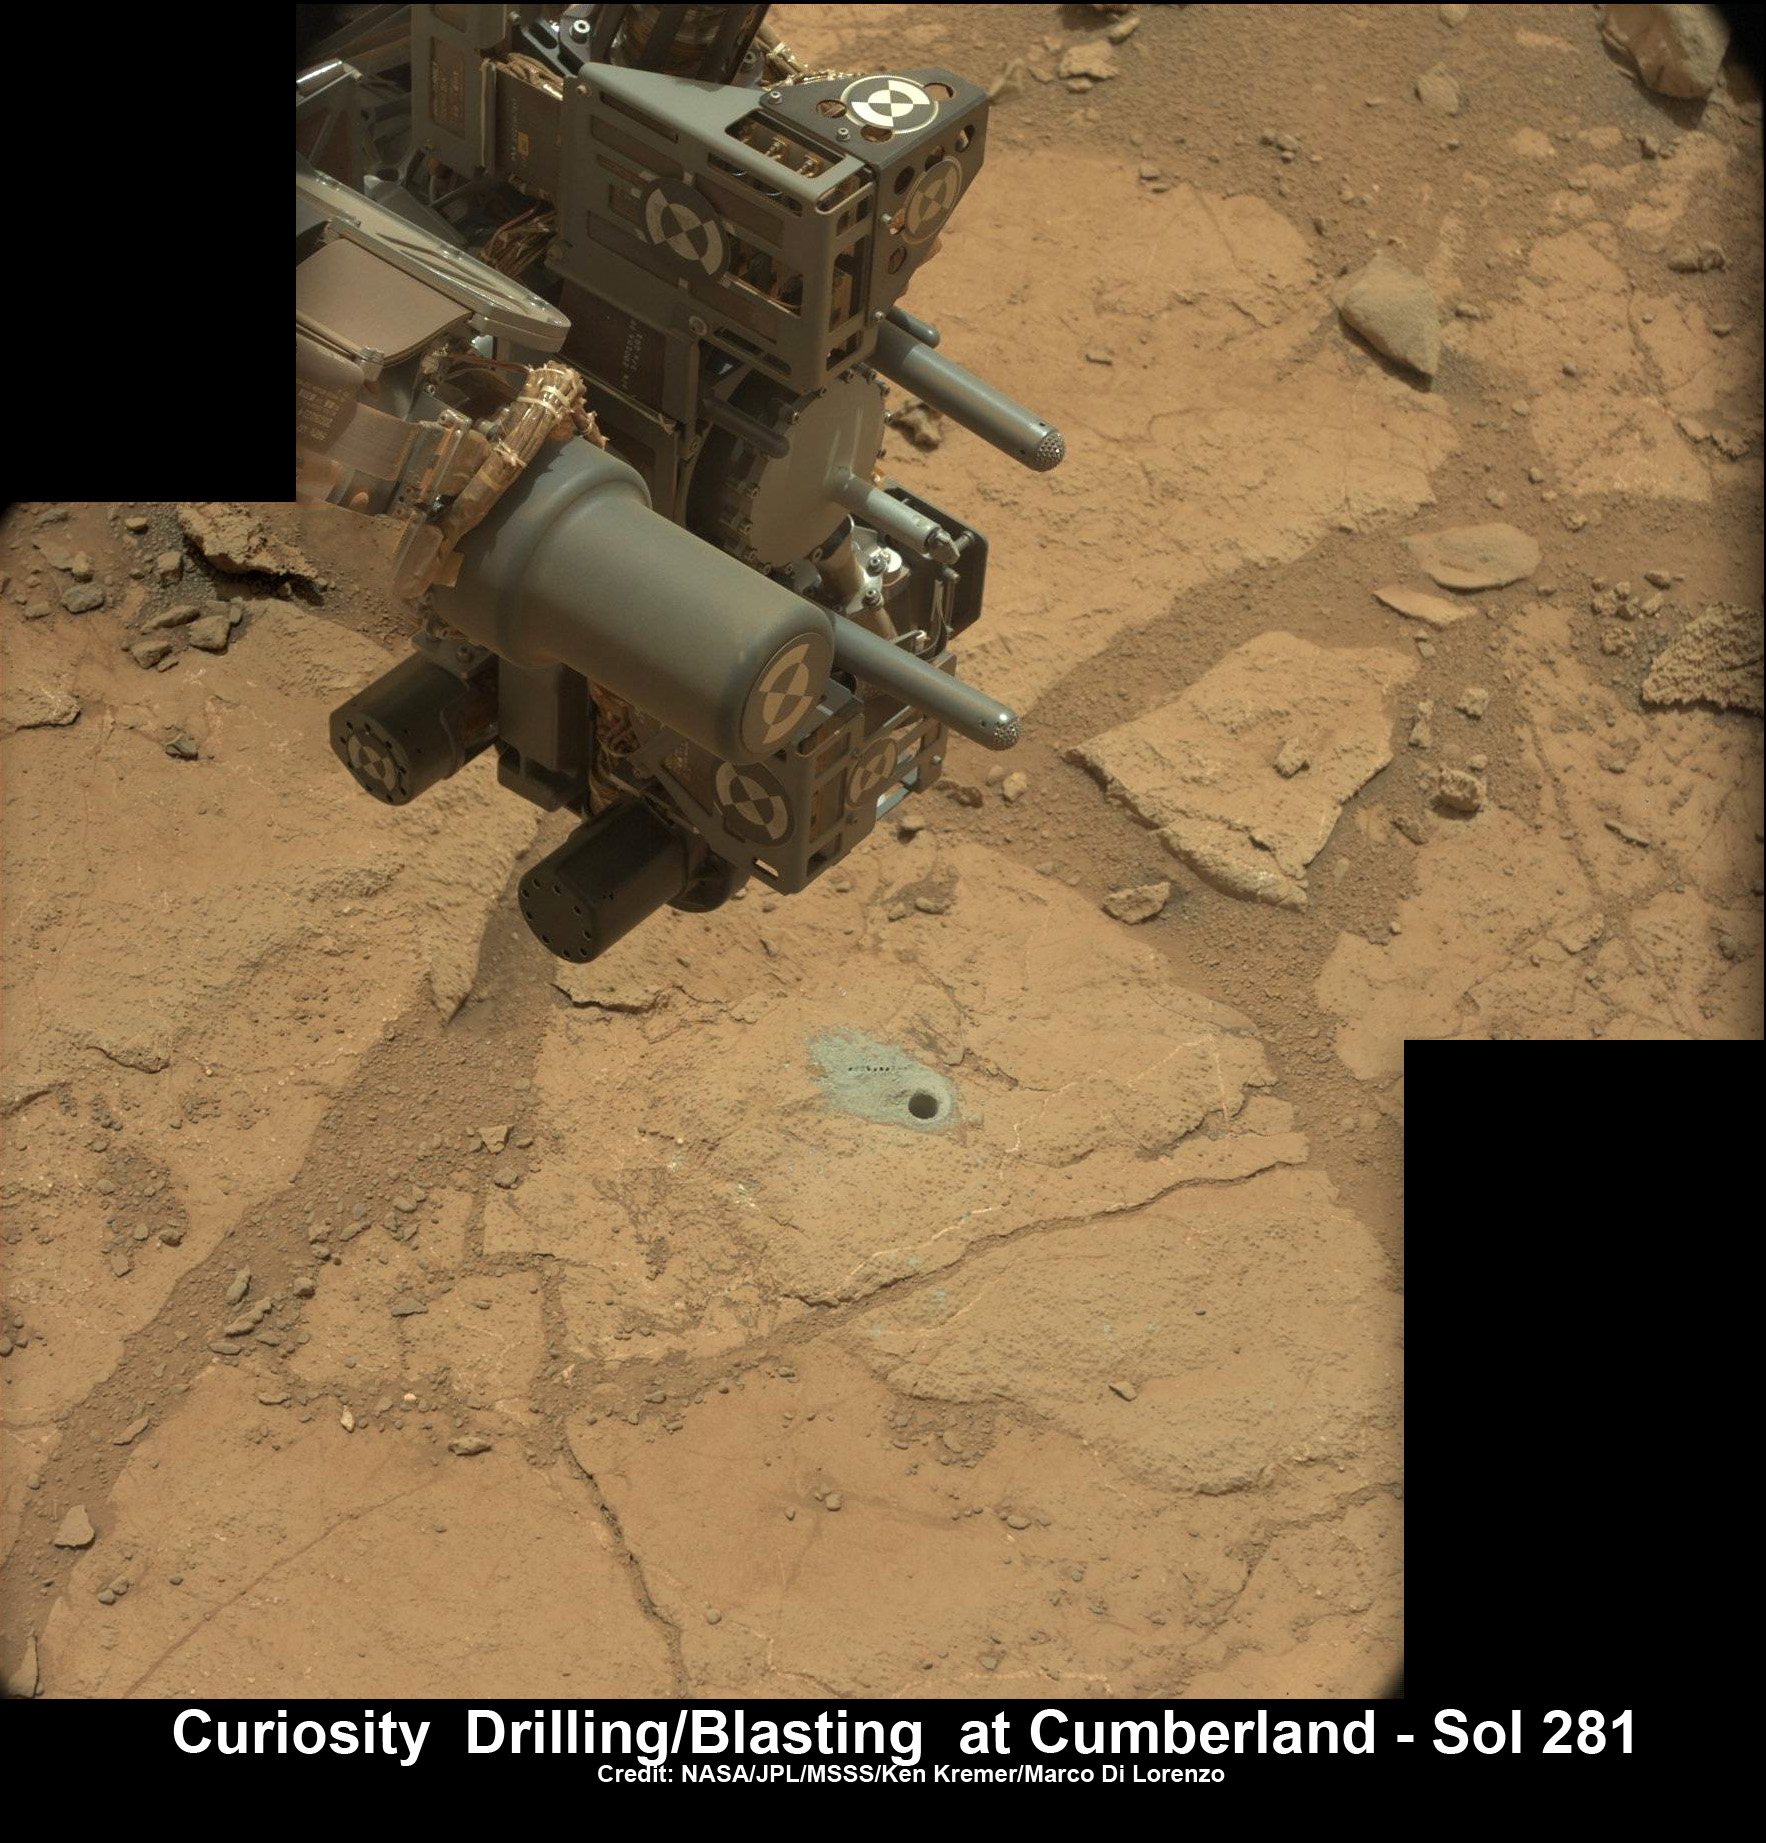 Curiosity’s hi tech ‘hand’ and percussion drill hovers above 2nd bore hole at Cumberland mudstone rock after penetrating laser blasting to expose chemical composition and unlock secrets of ancient flow of Martian water. Note the row of small pits next to the 0.6 inch (16 mm) diameter hole. Photo mosaic assembled from high resolution Mastcam images on May 21, 2013, Sol 281. Credit: NASA/JPL-Caltech/MSSS/Ken Kremer (kenkremer.com)/Marco Di Lorenzo